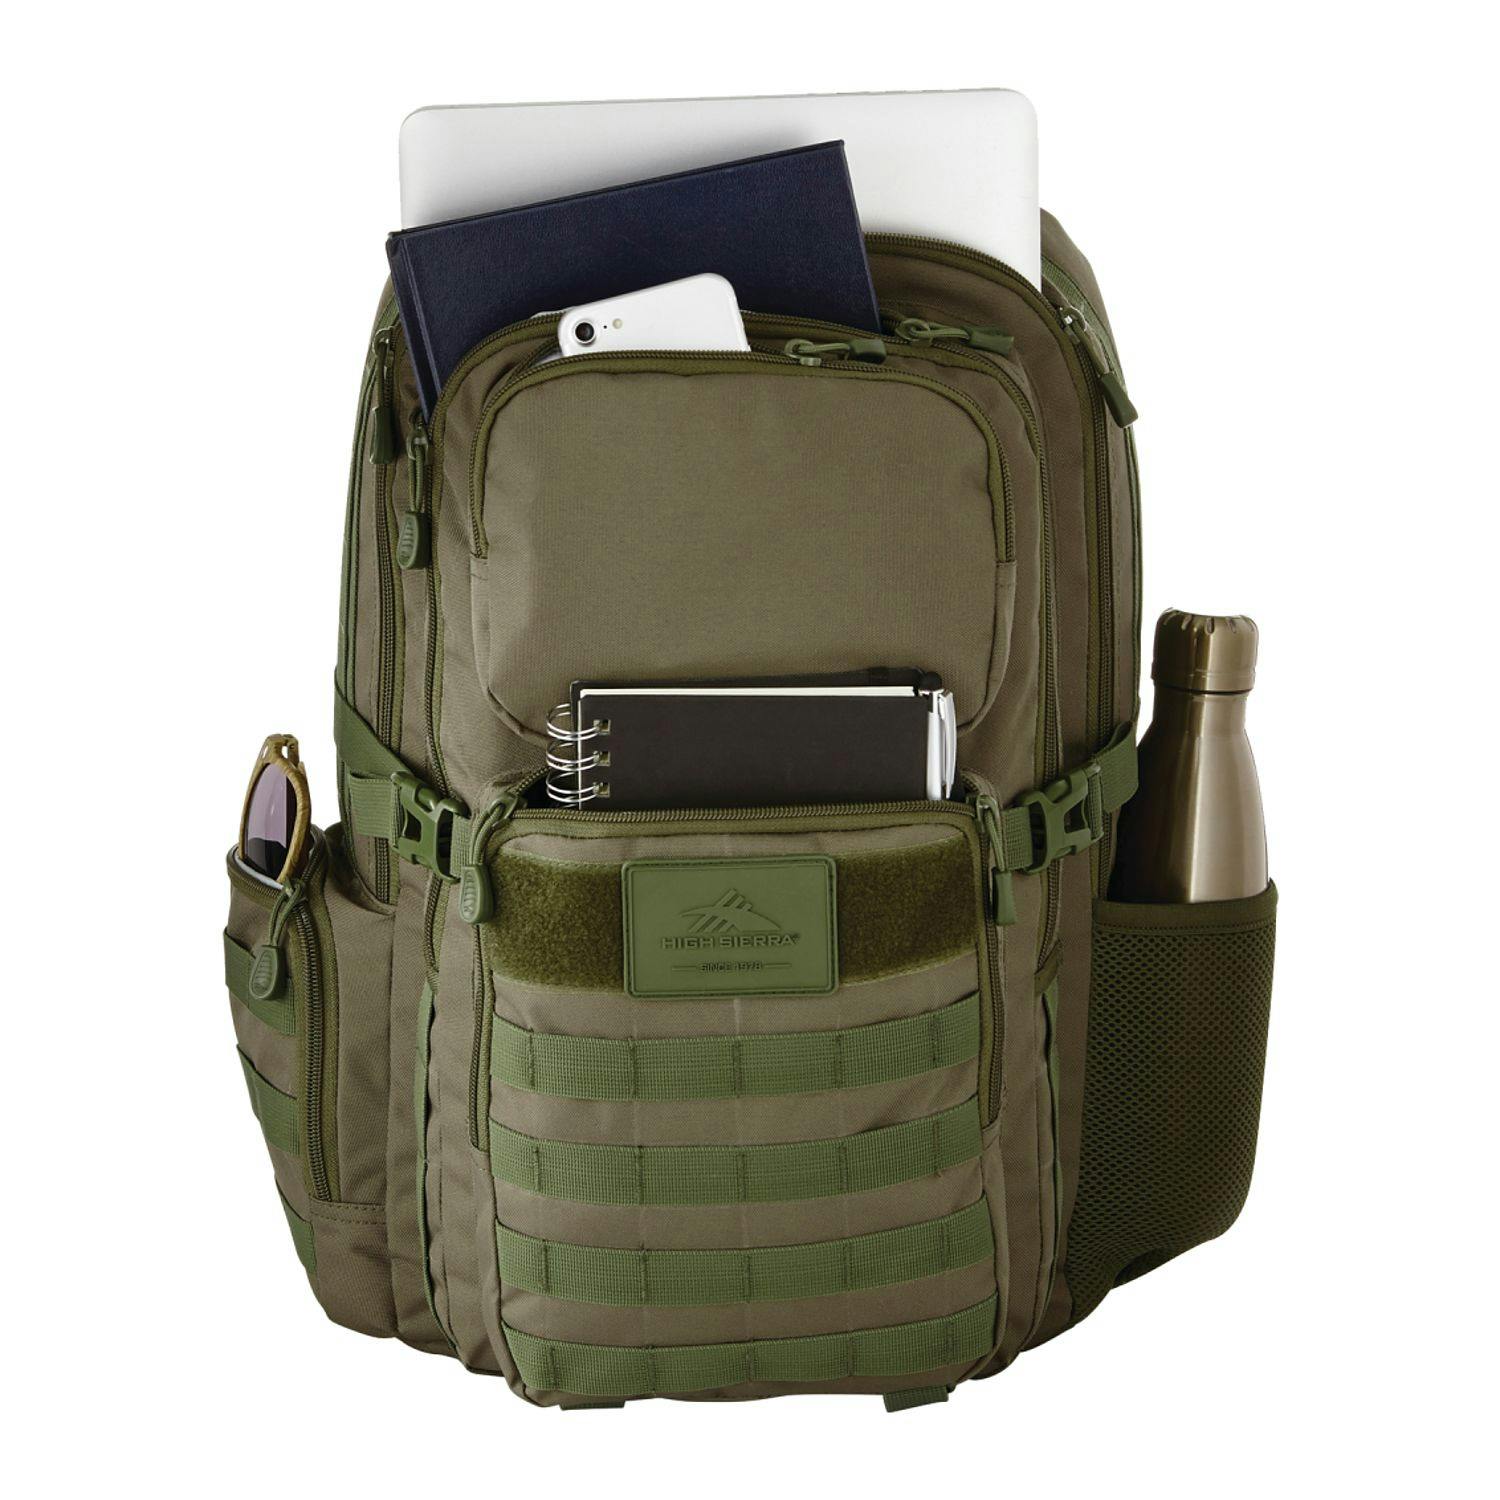 High Sierra Tactical 15" Computer Pack - additional Image 1